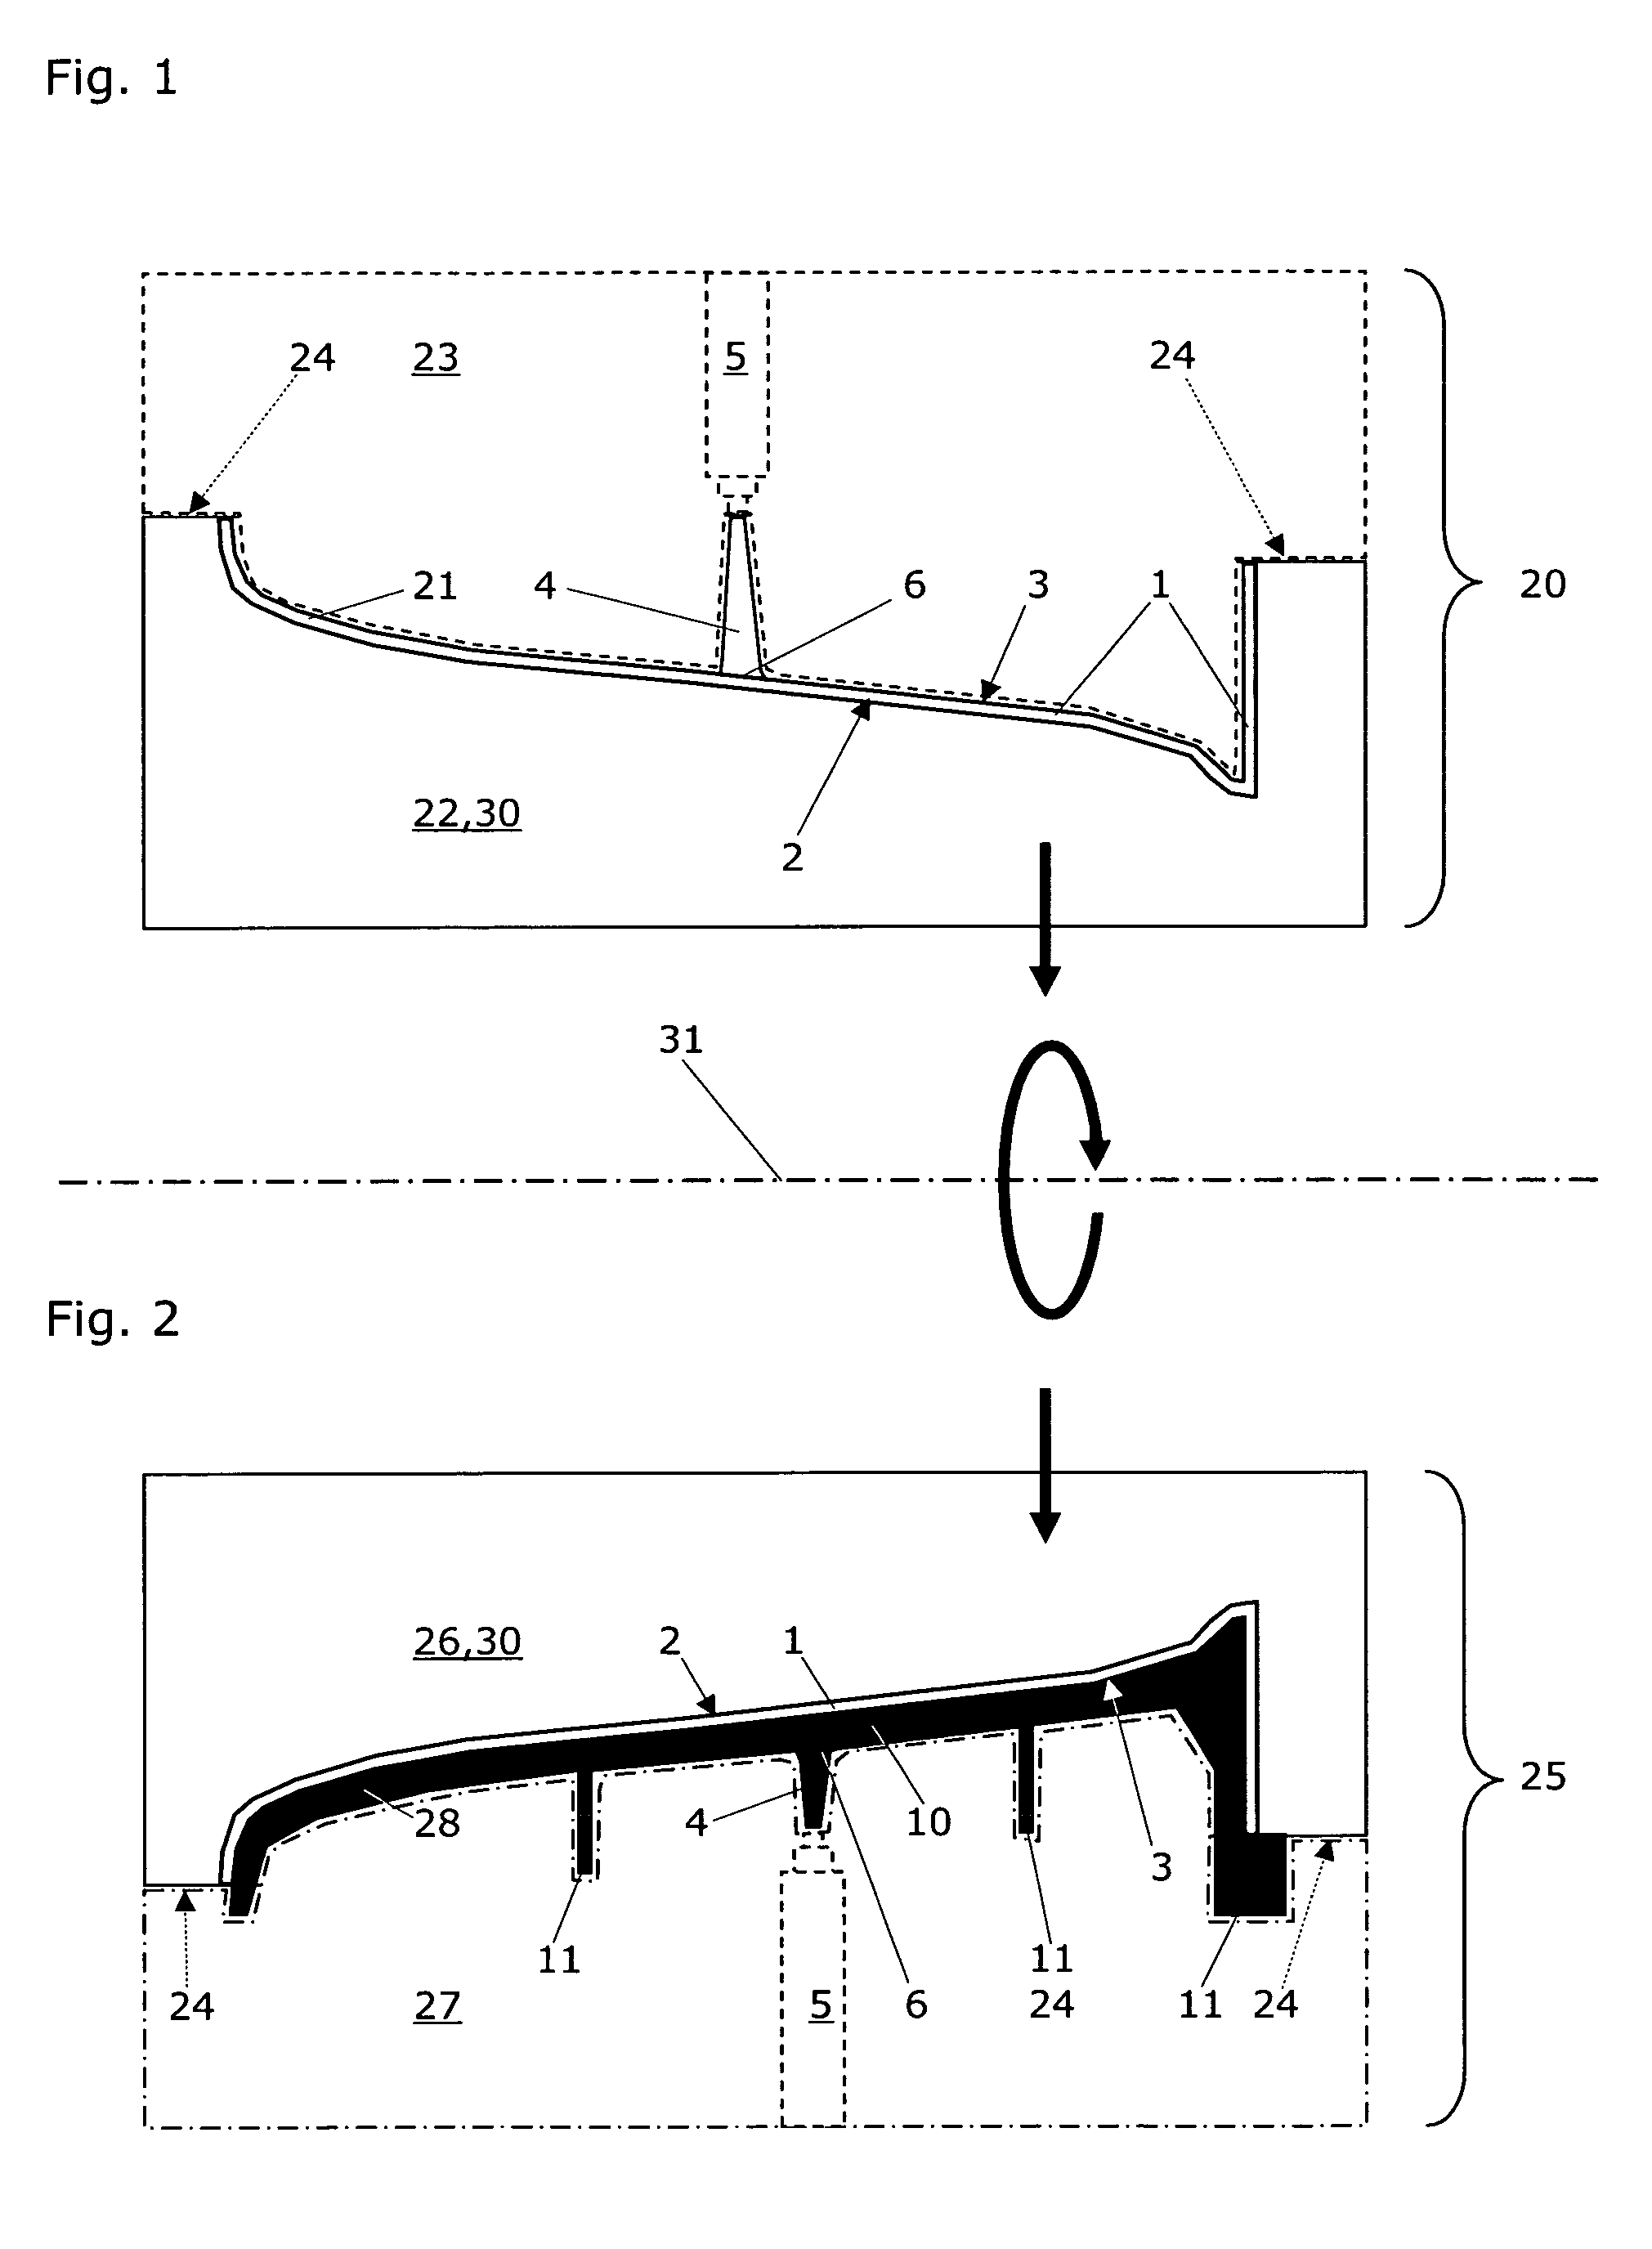 Injection molding method for manufacturing plastic parts